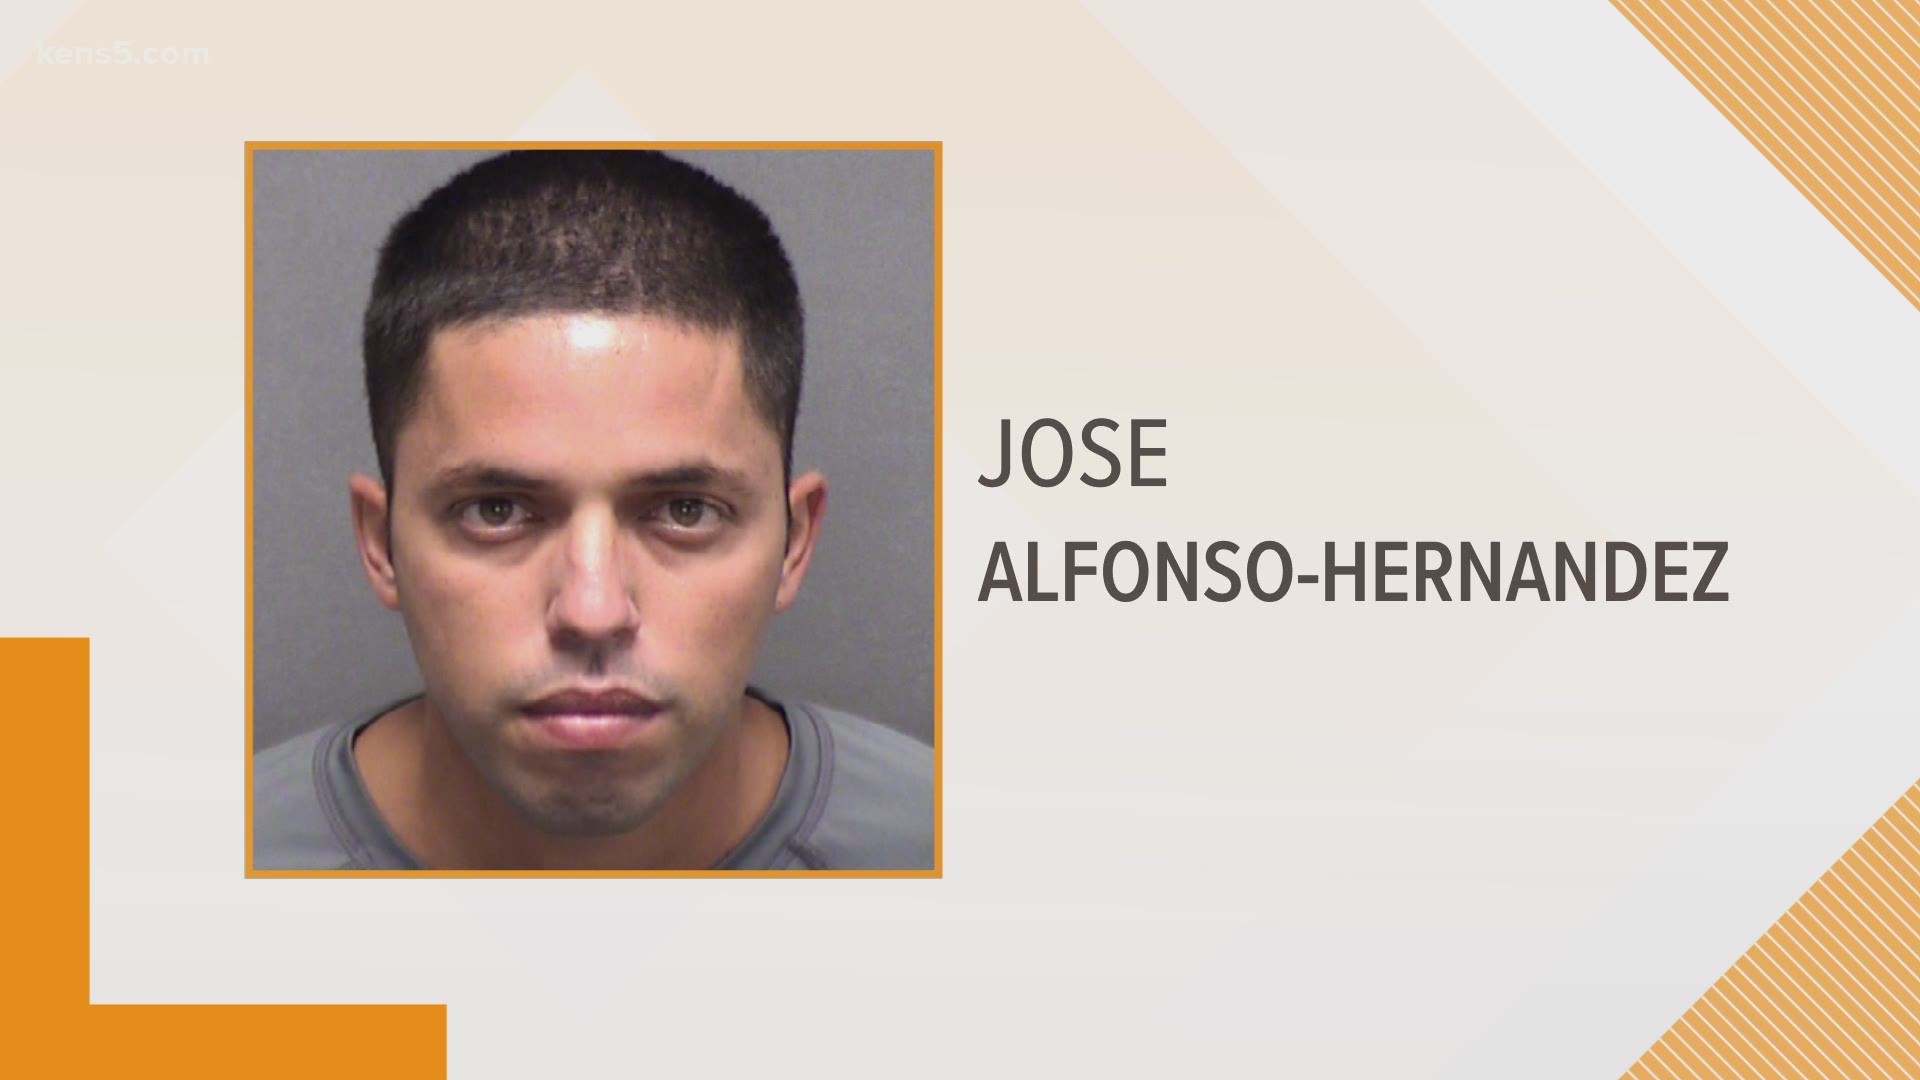 A big rig driver accused of a deadly hit-and-run is now behind bars. And his father helped authorities make the arrest, San Antonio police said.